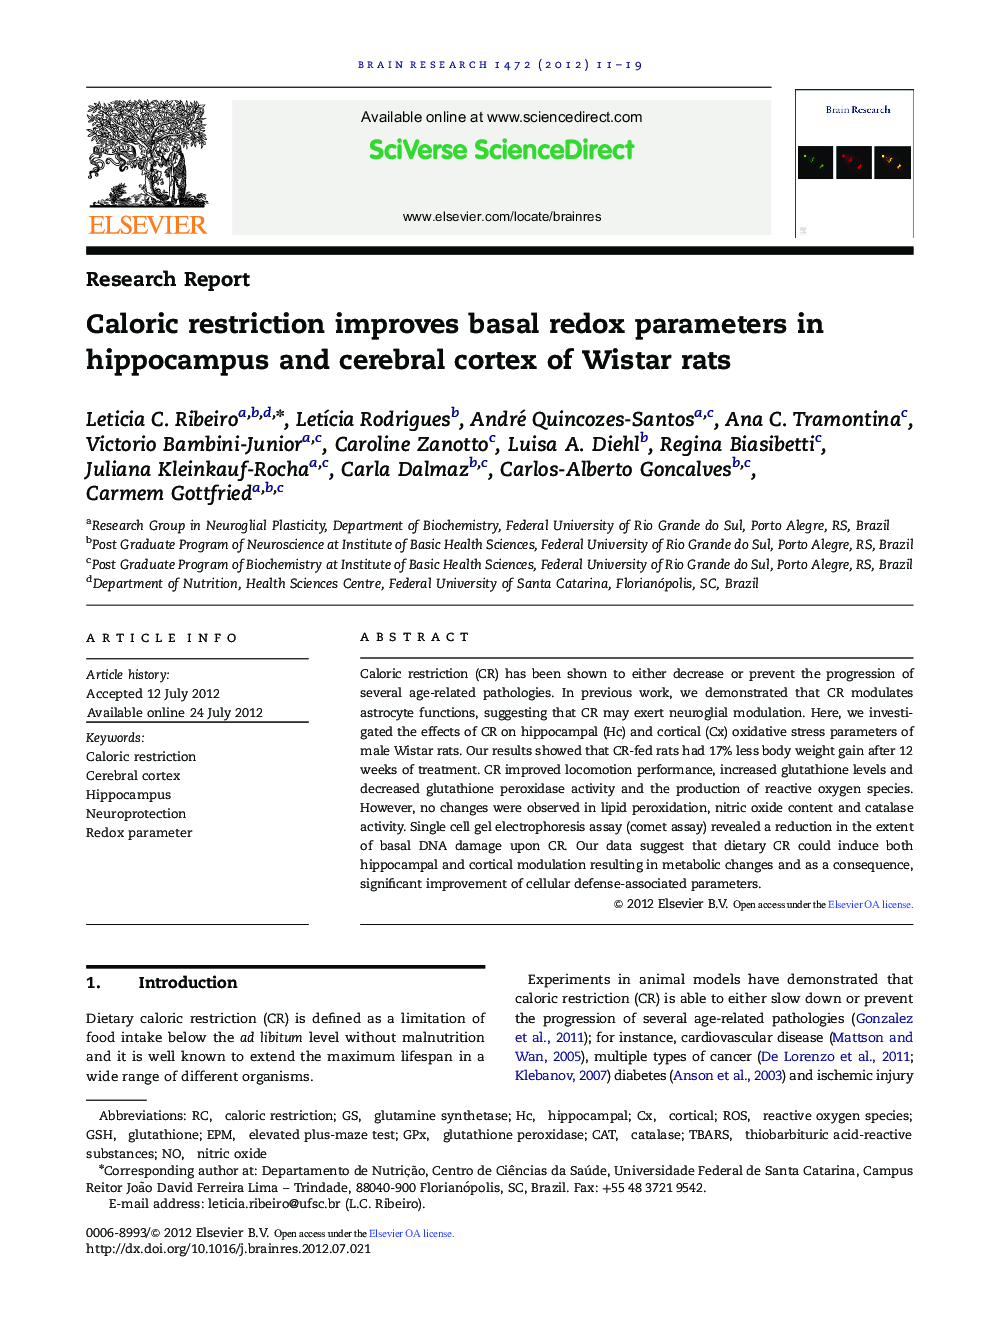 Research ReportCaloric restriction improves basal redox parameters in hippocampus and cerebral cortex of Wistar rats